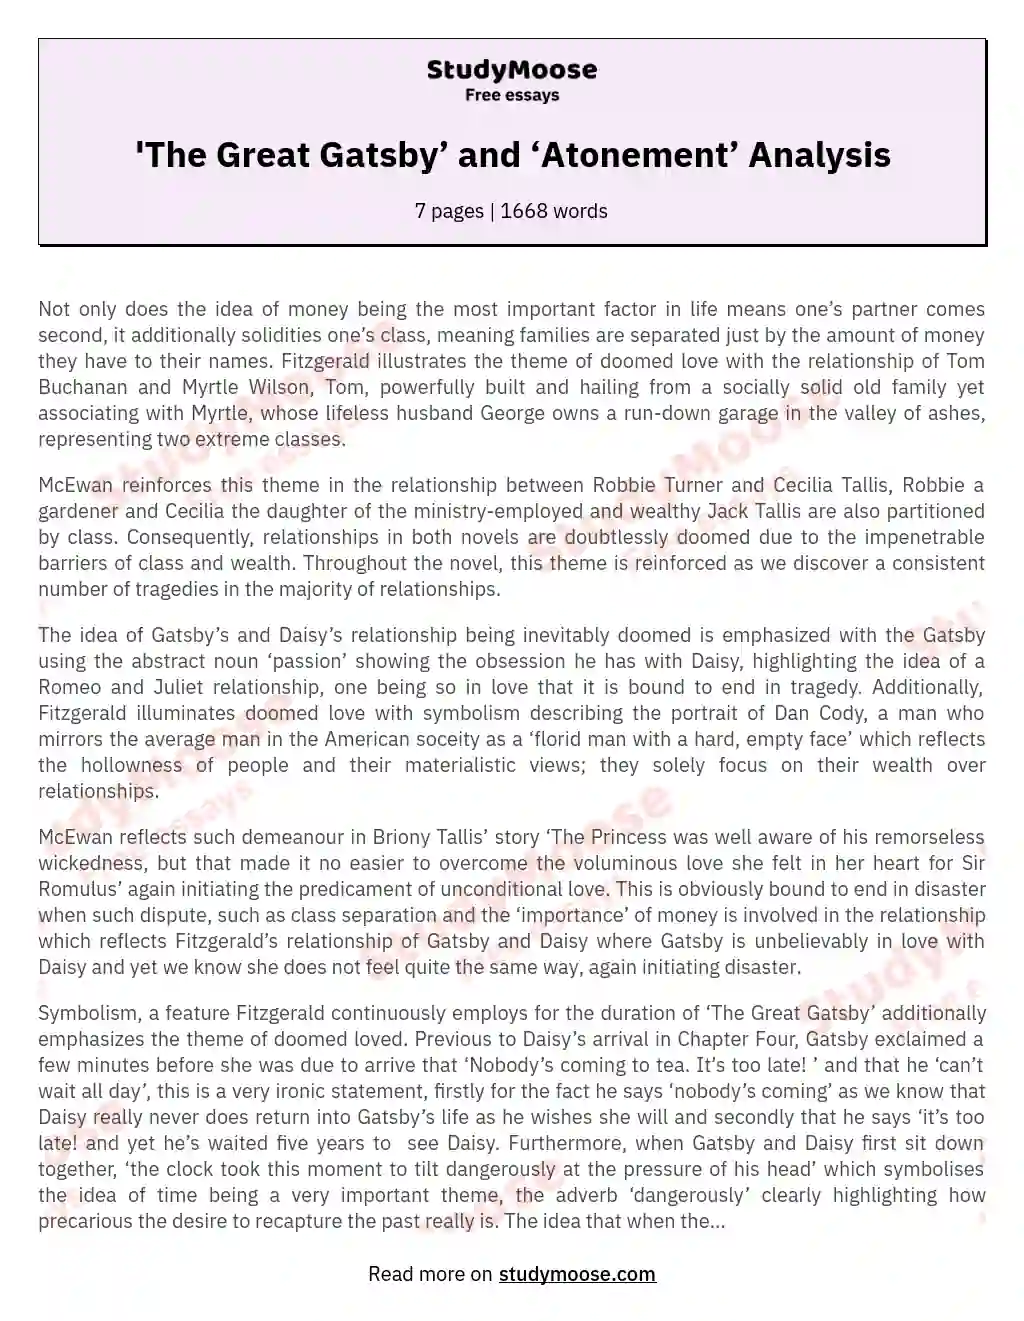 'The Great Gatsby’ and ‘Atonement’ Analysis